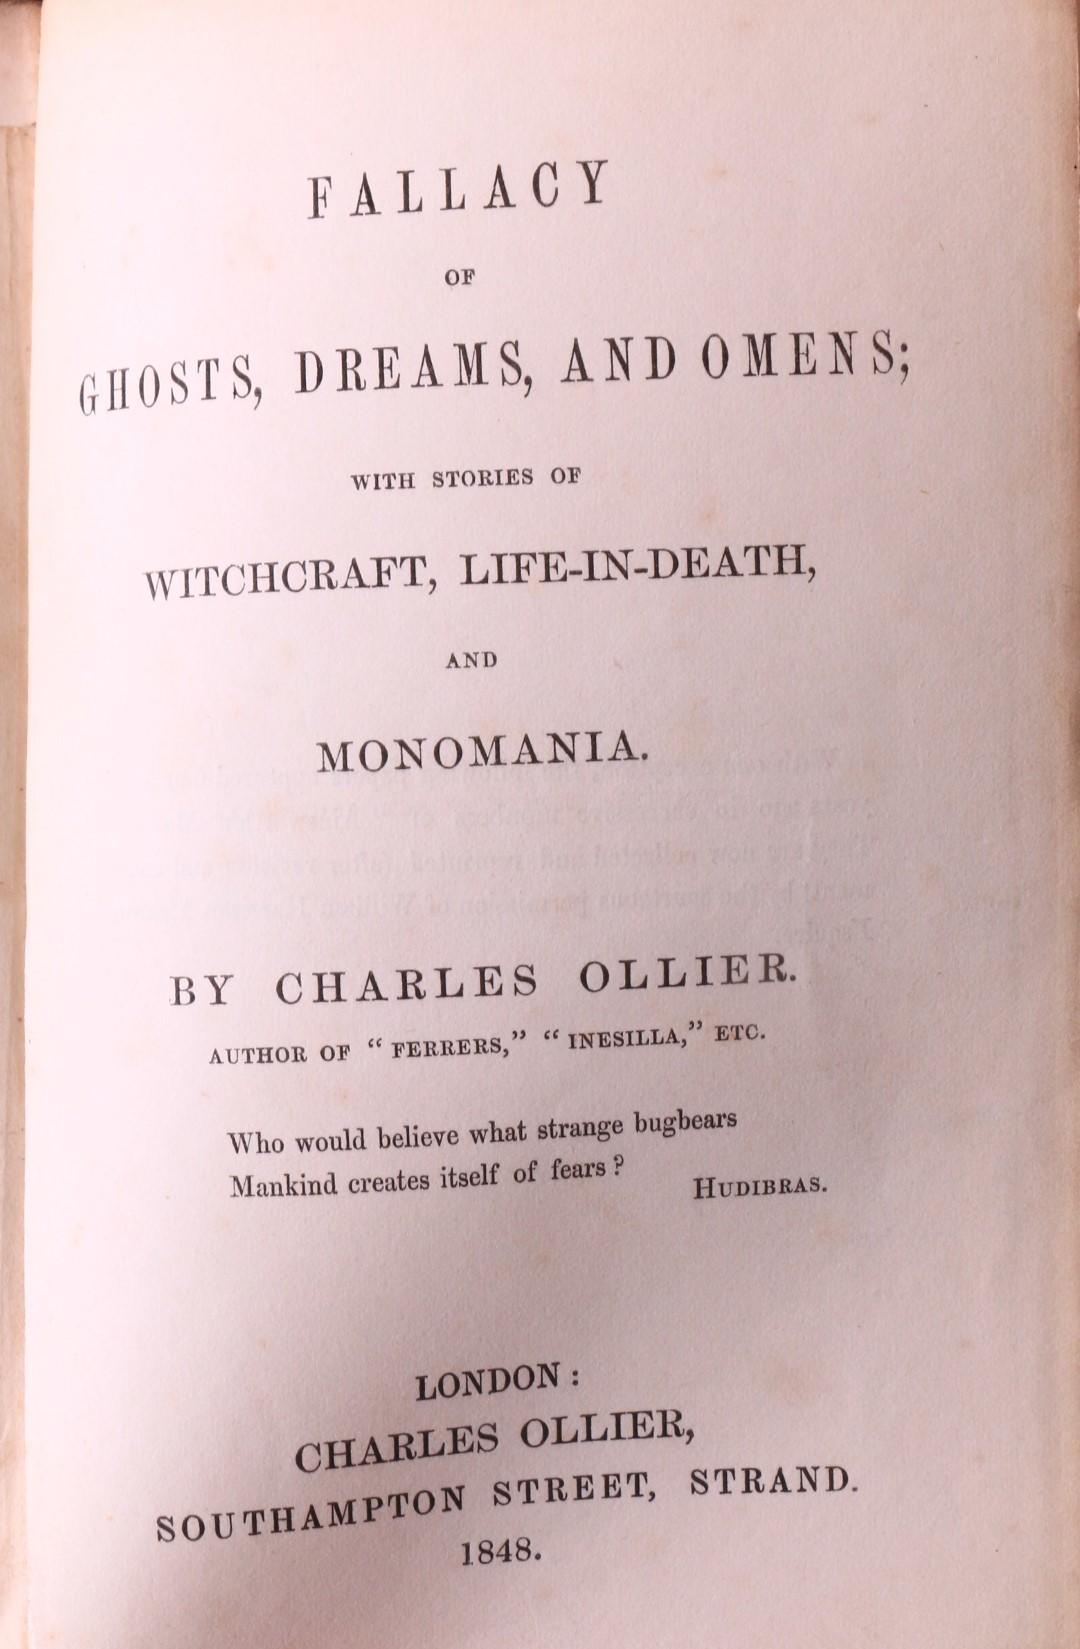 Charles Ollier - Fallacy of Ghosts, Dreams, and Omens; with Stories of Witchcraft, Life-in-Death, and Monomania 1848